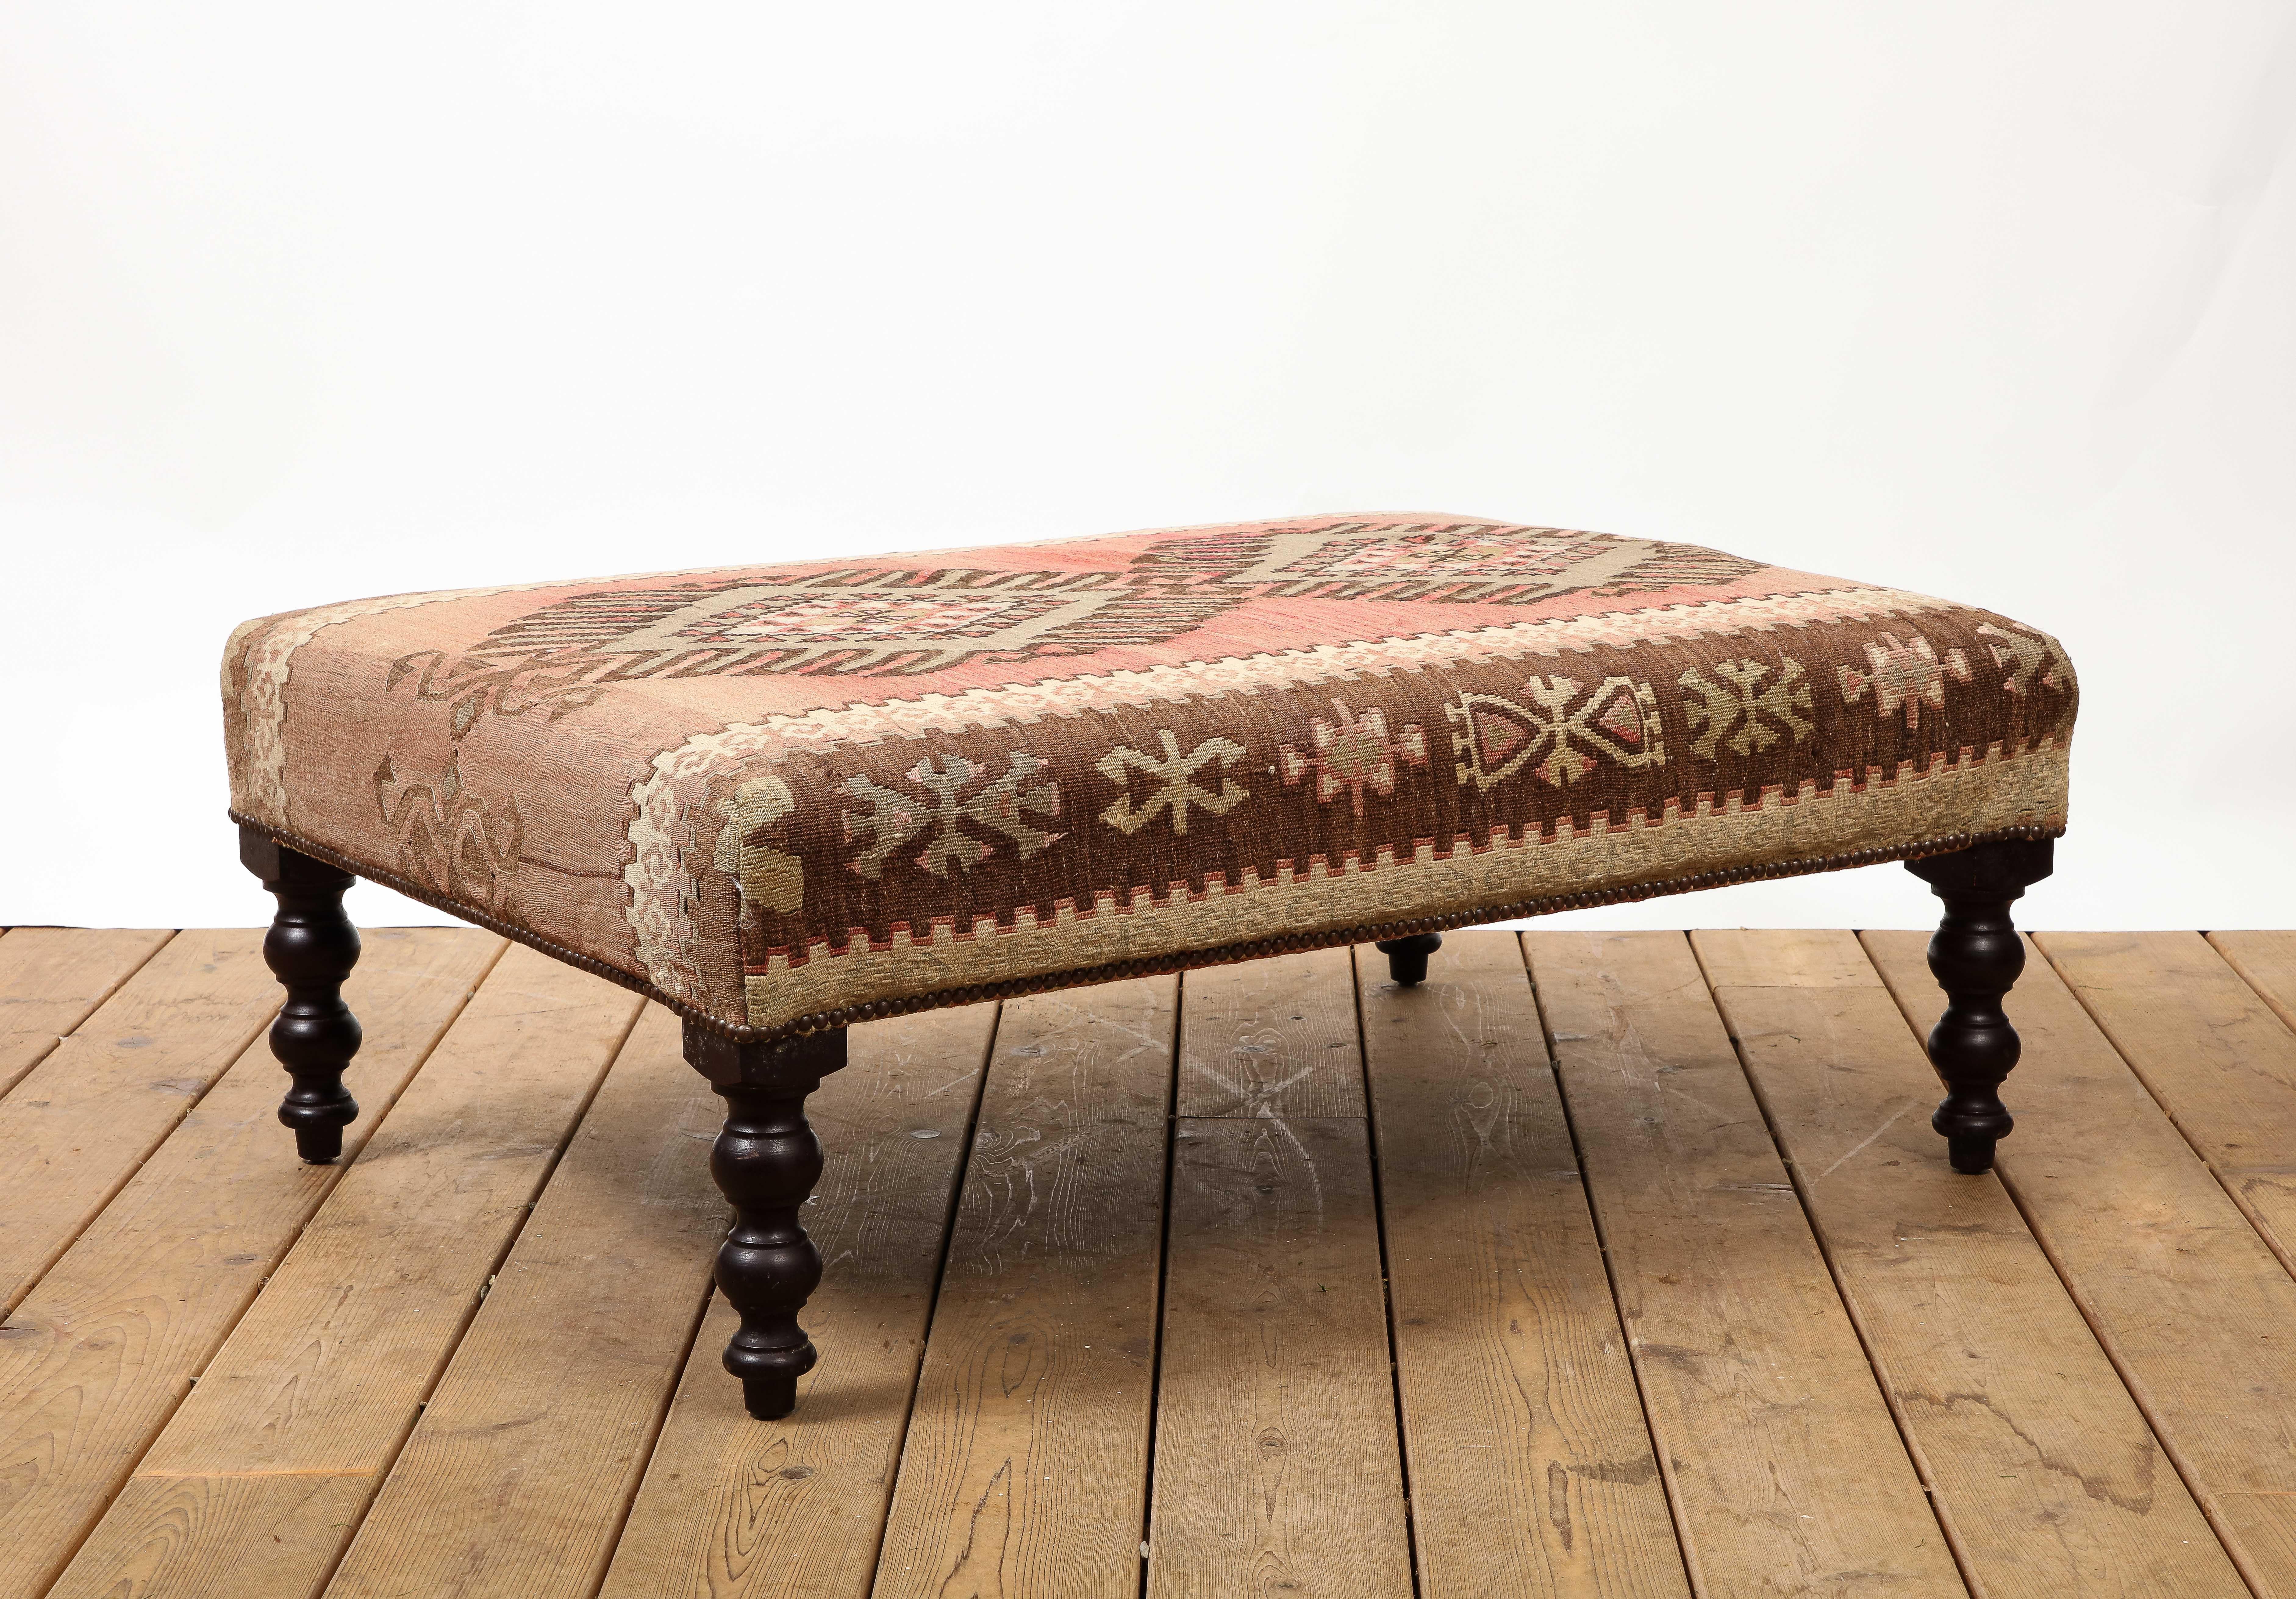 Turned George Smith Rectangular Ottoman with Unique Kilim Top